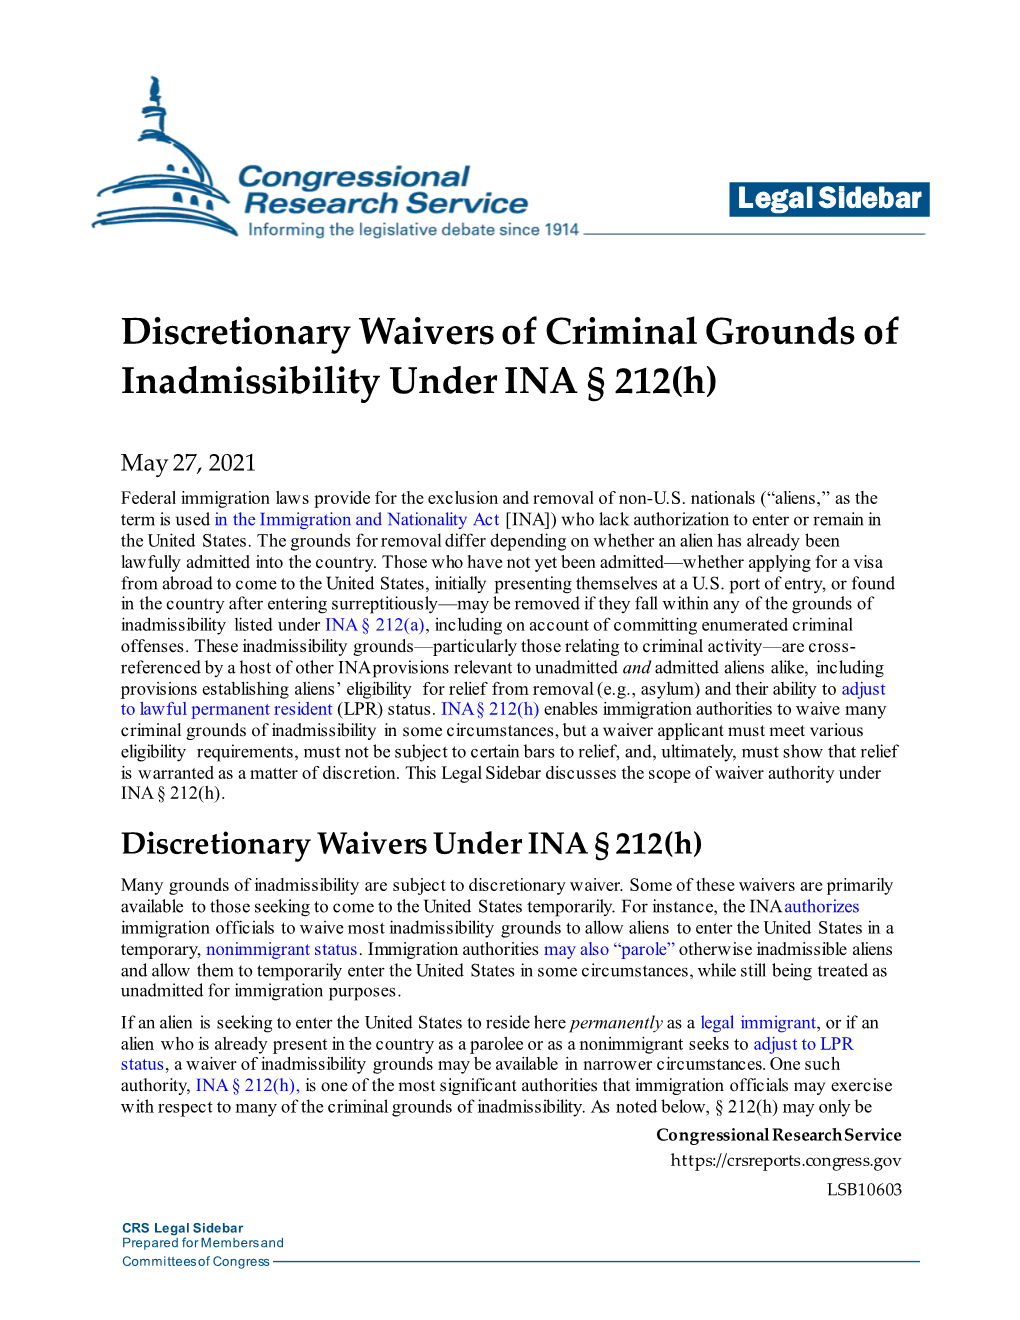 Discretionary Waivers of Criminal Grounds of Inadmissibility Under INA § 212(H)